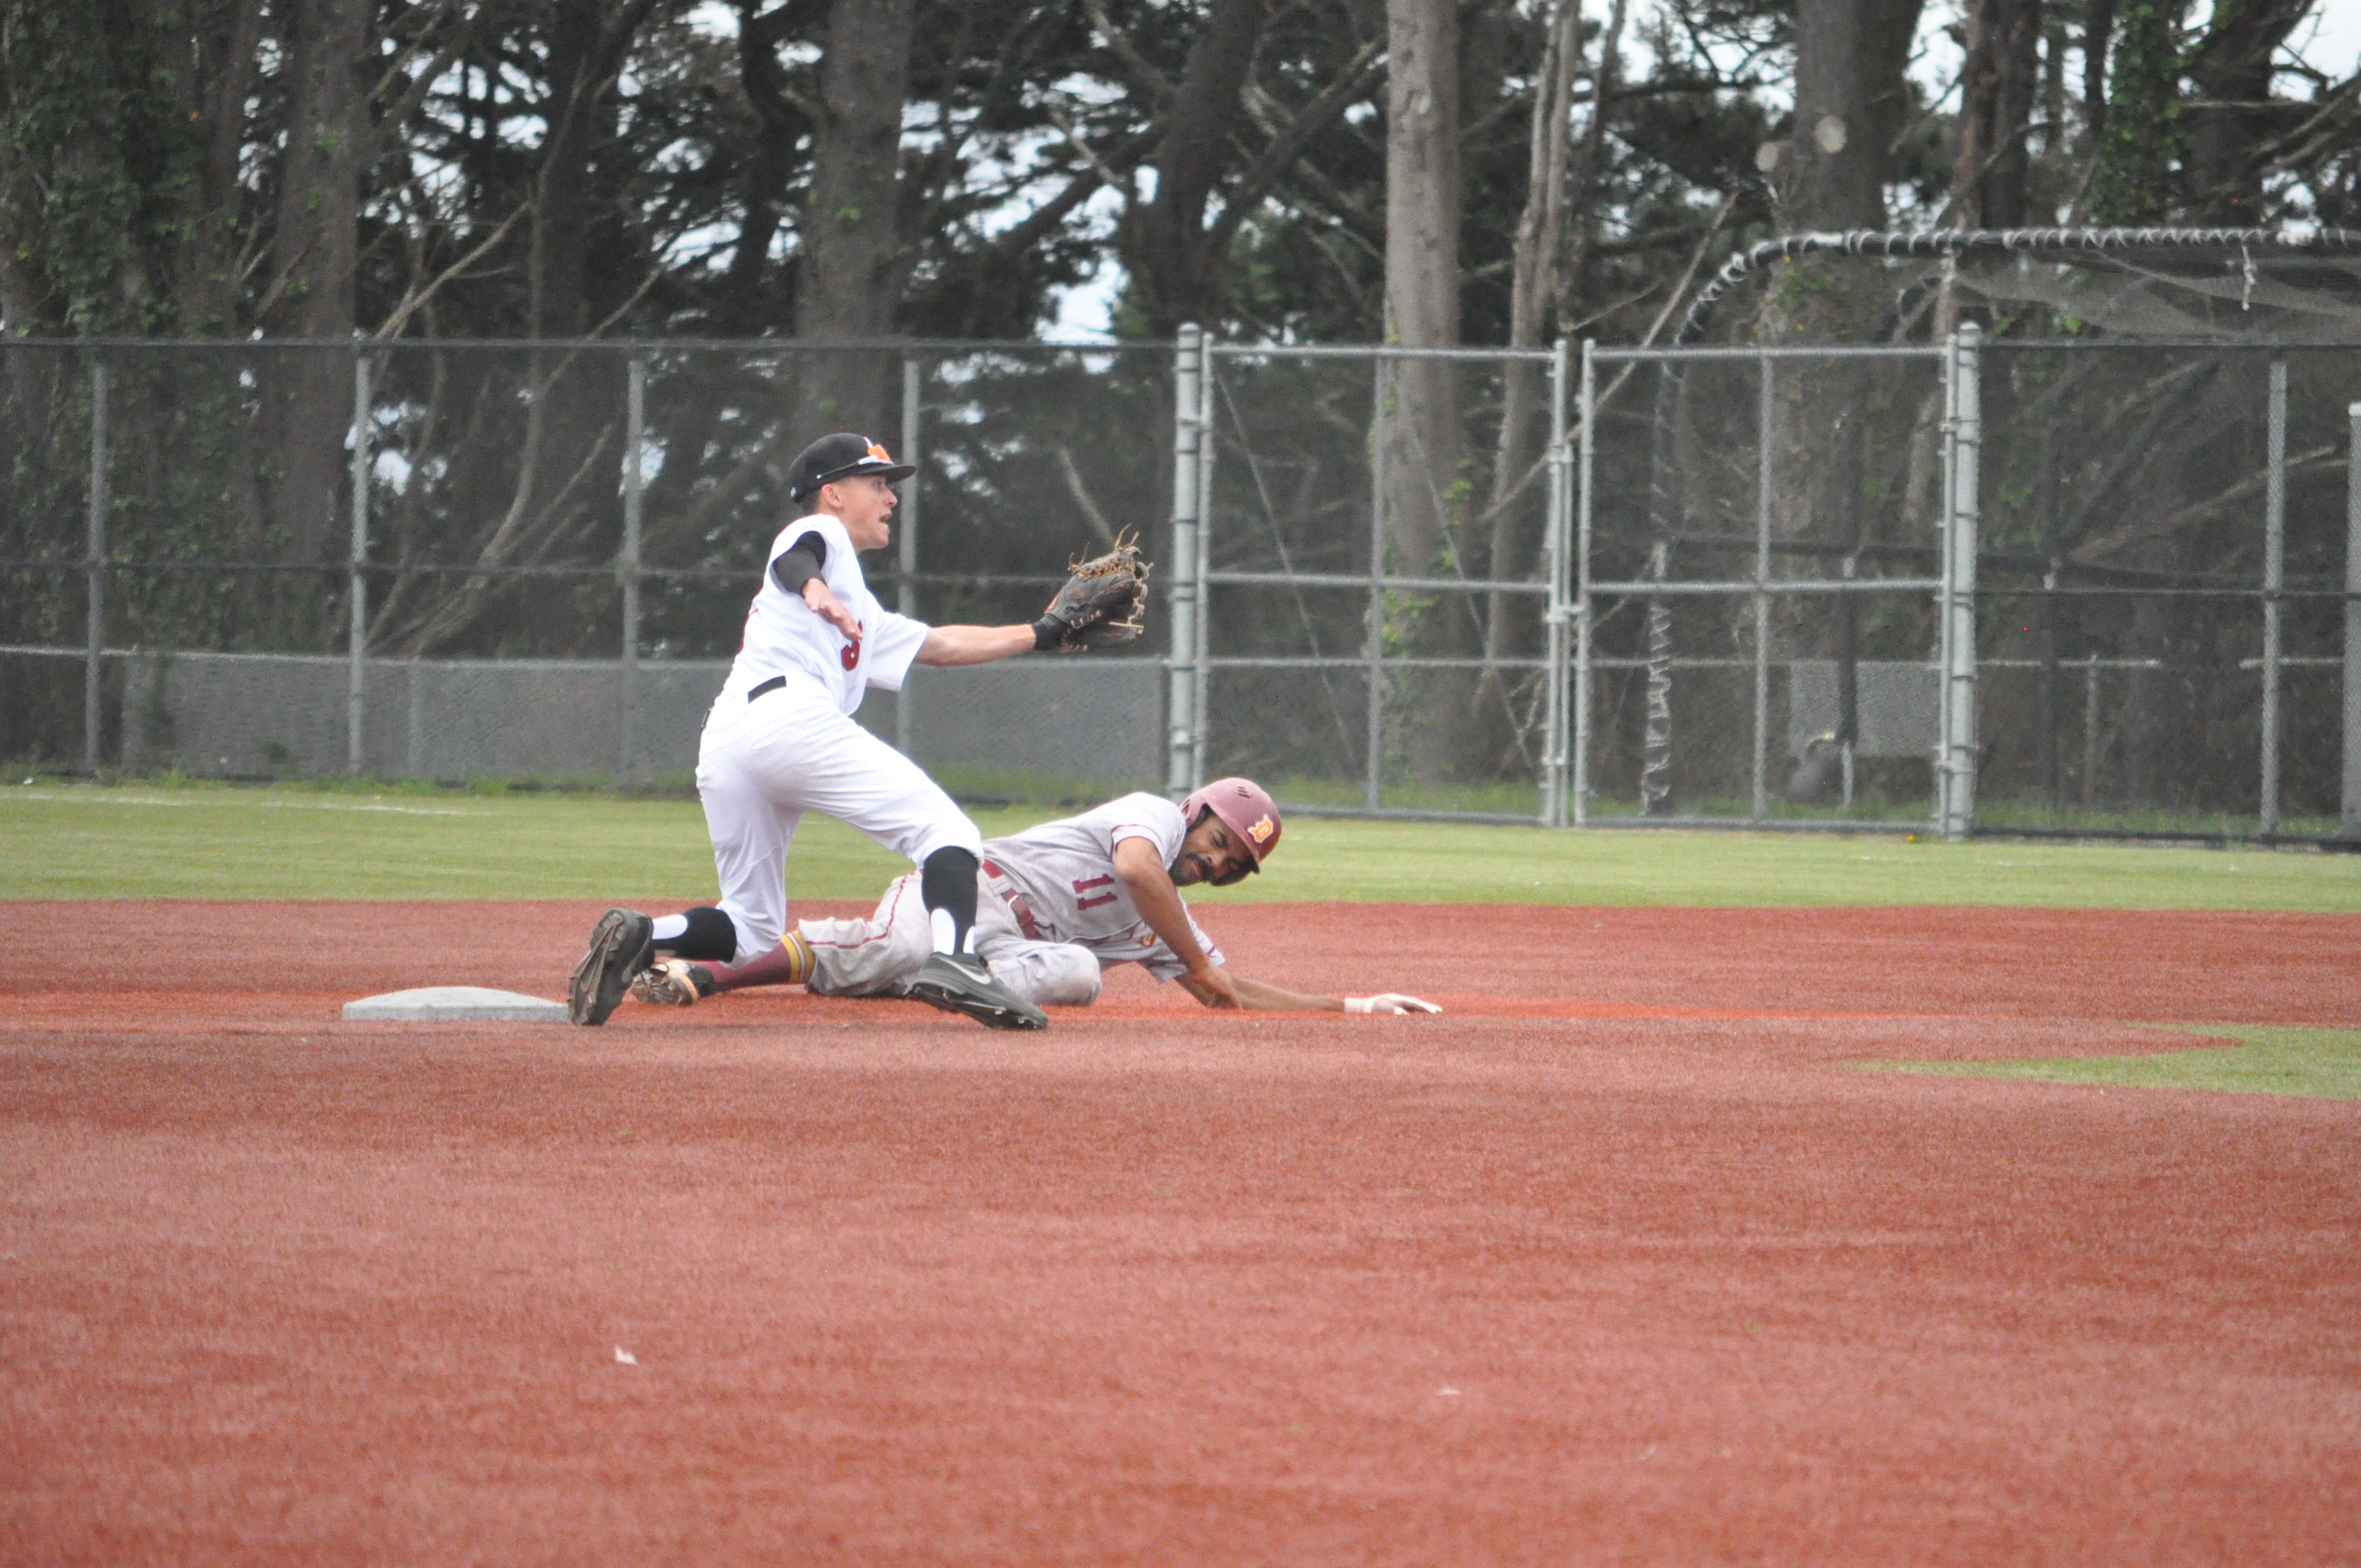 The Rams second baseman Ian Chiang (#5) attempts to tag out De Anza runner stealing second on April 5, 2018. Photo by Peter J. Suter/The Guardsman.